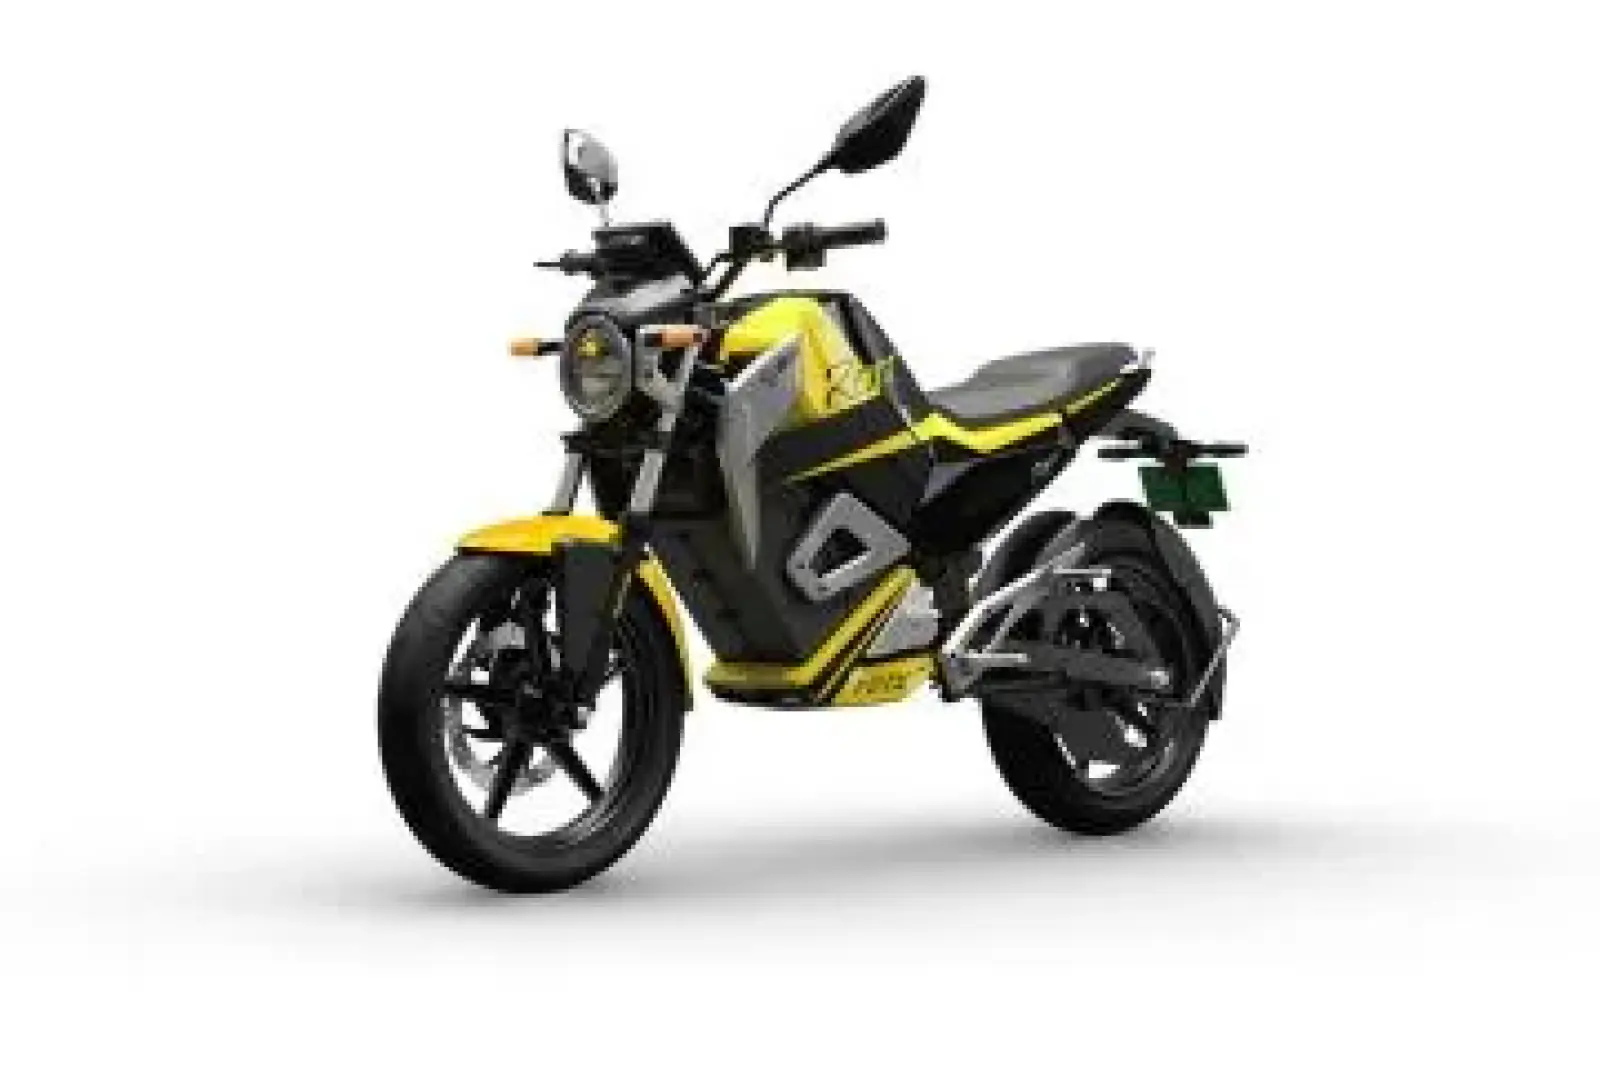 A chance to buy an Electric Bike worth Rs 1.50 lakh at a low price, the company is giving a discount of 40 thousand